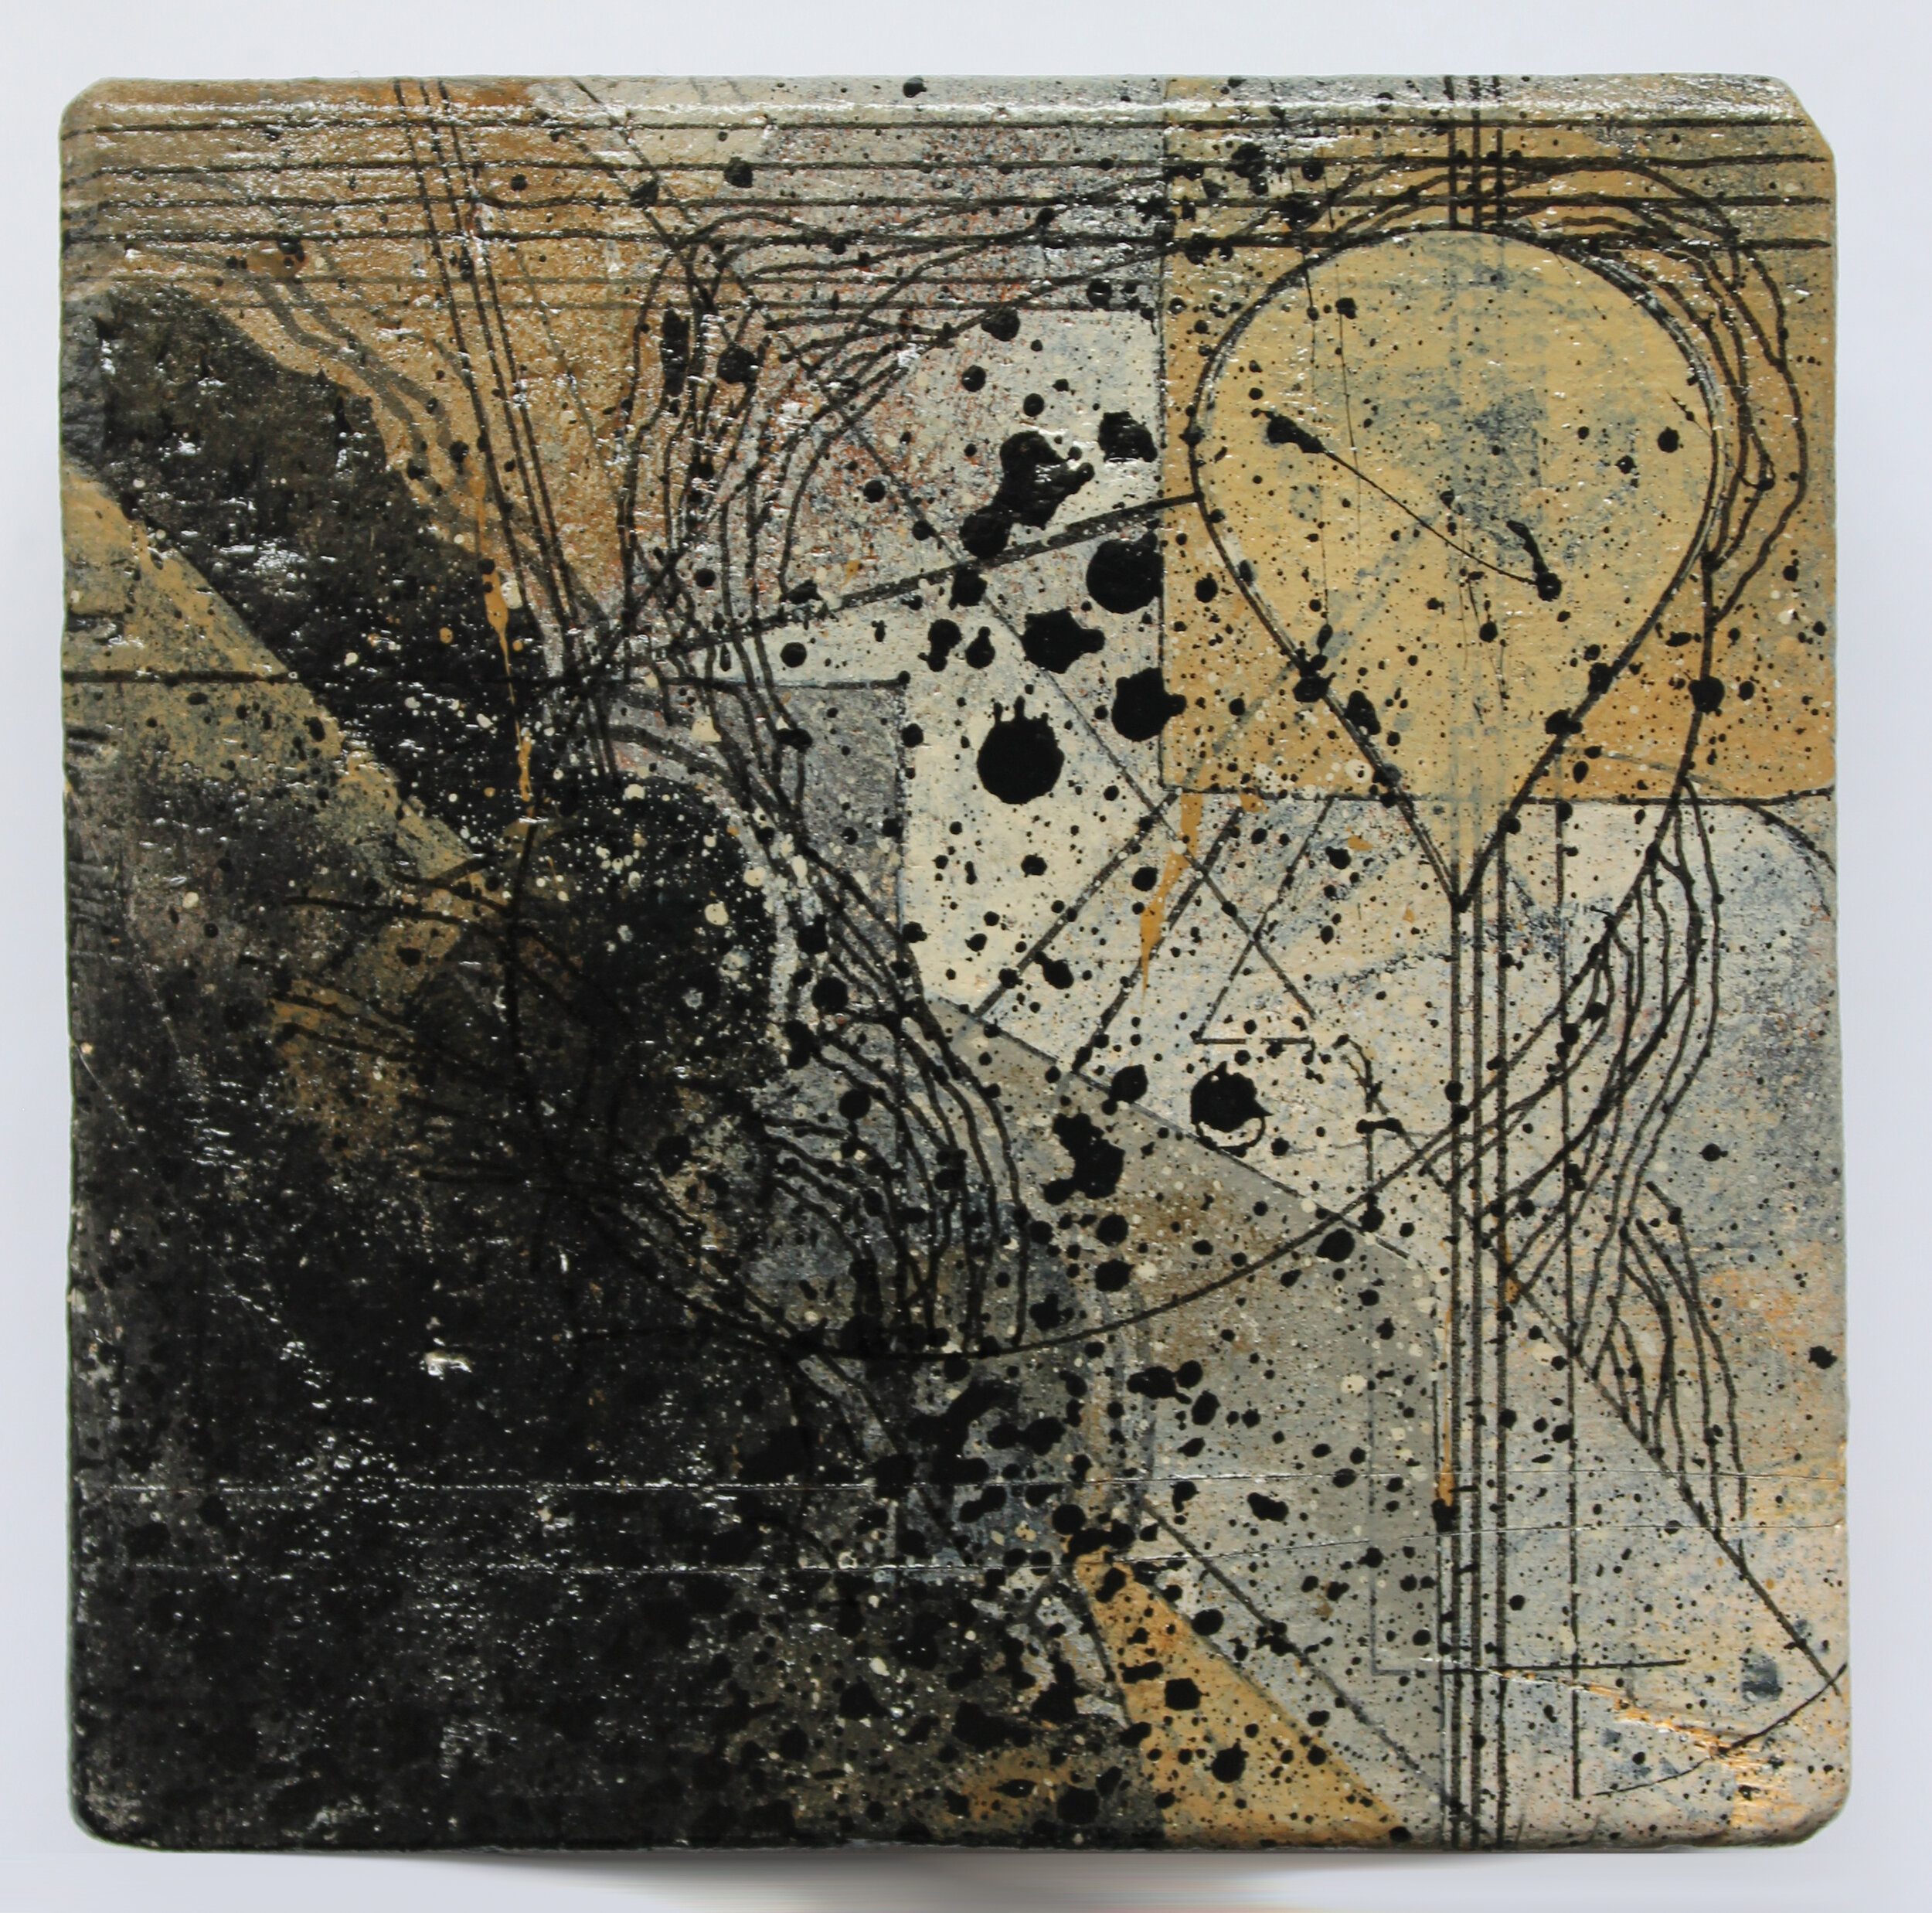  3 x 3 inches  Woodblock  Acrylic, Ink, Metal Leaf, Pencil, Micron  Summer, 2020  (Sold) 